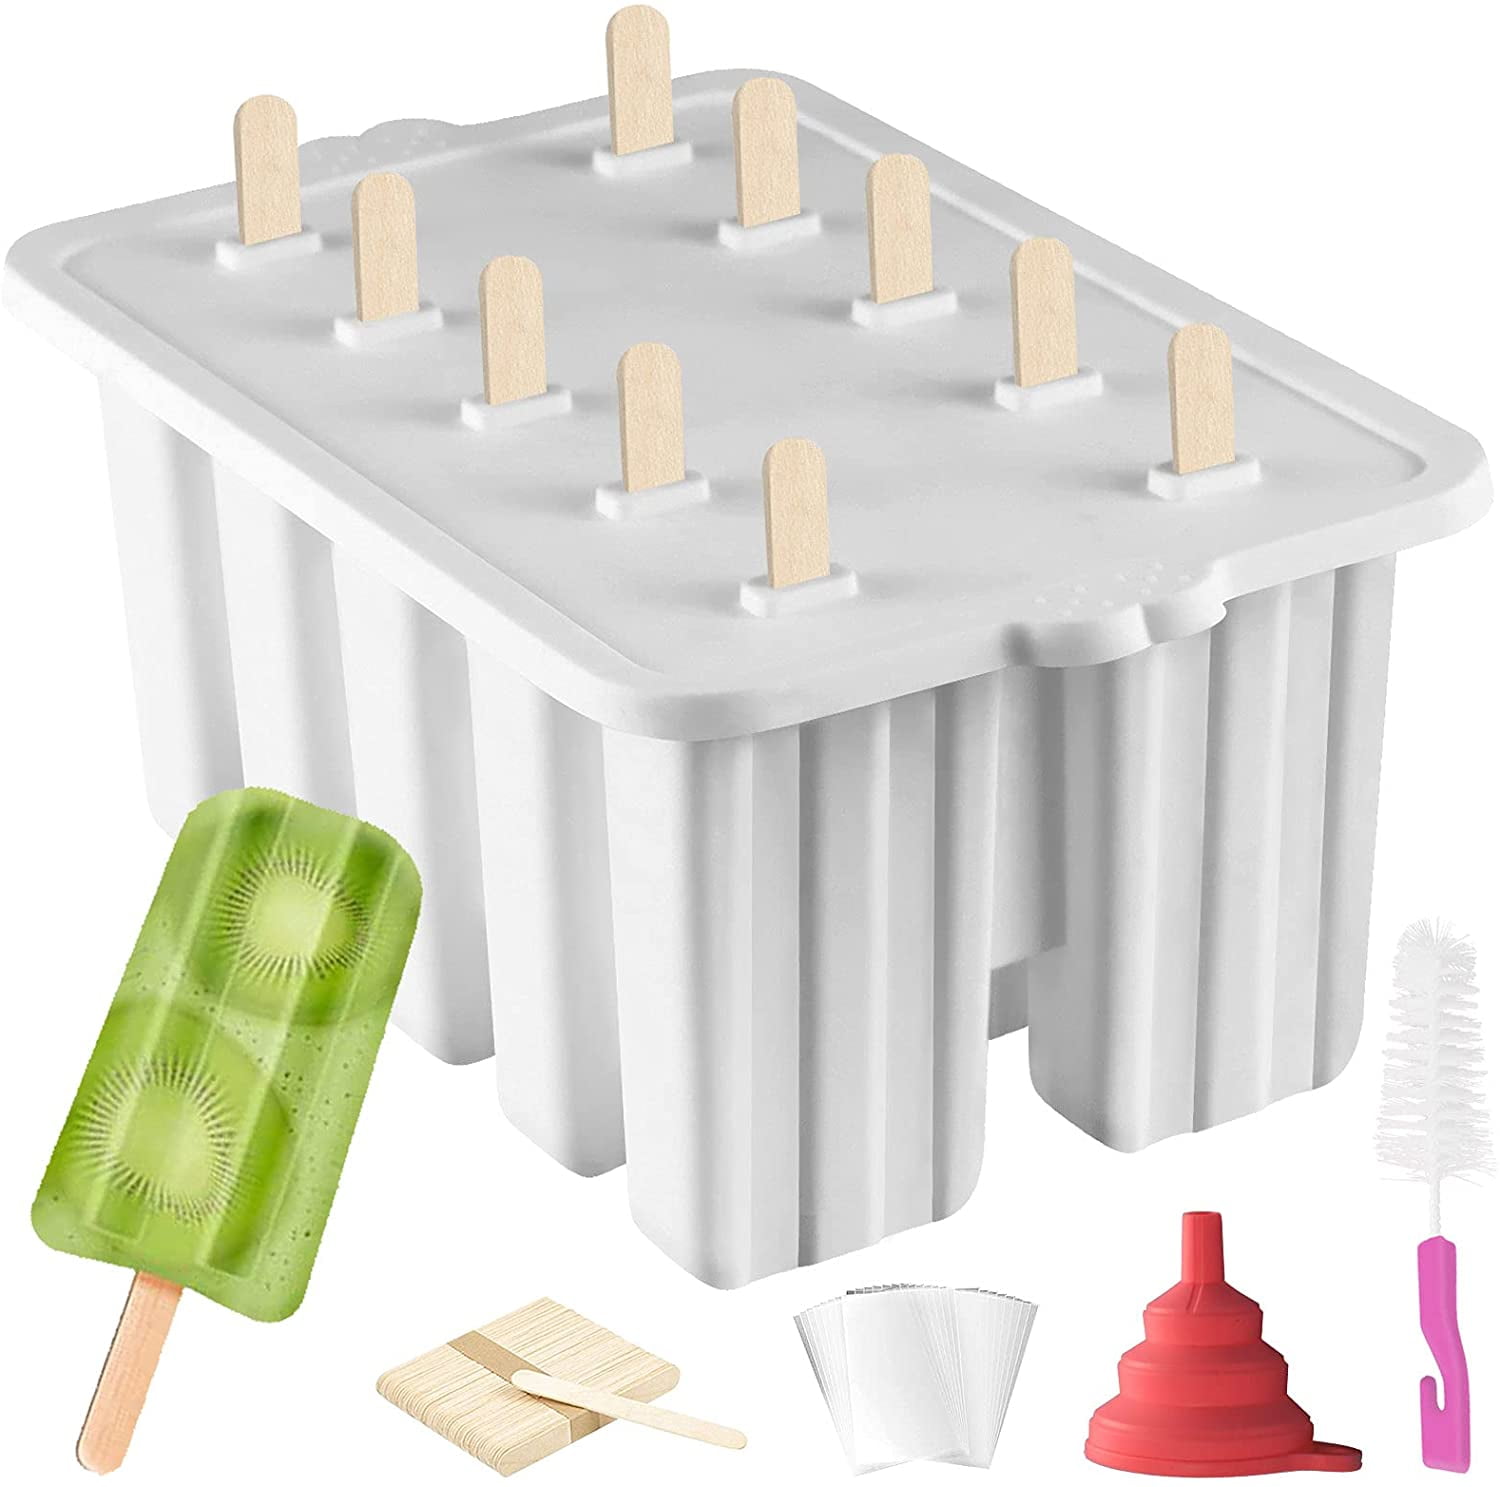 Maker With Sticks Ice Cream Tools Oval Popsicle Moulds Food Silicone Molds